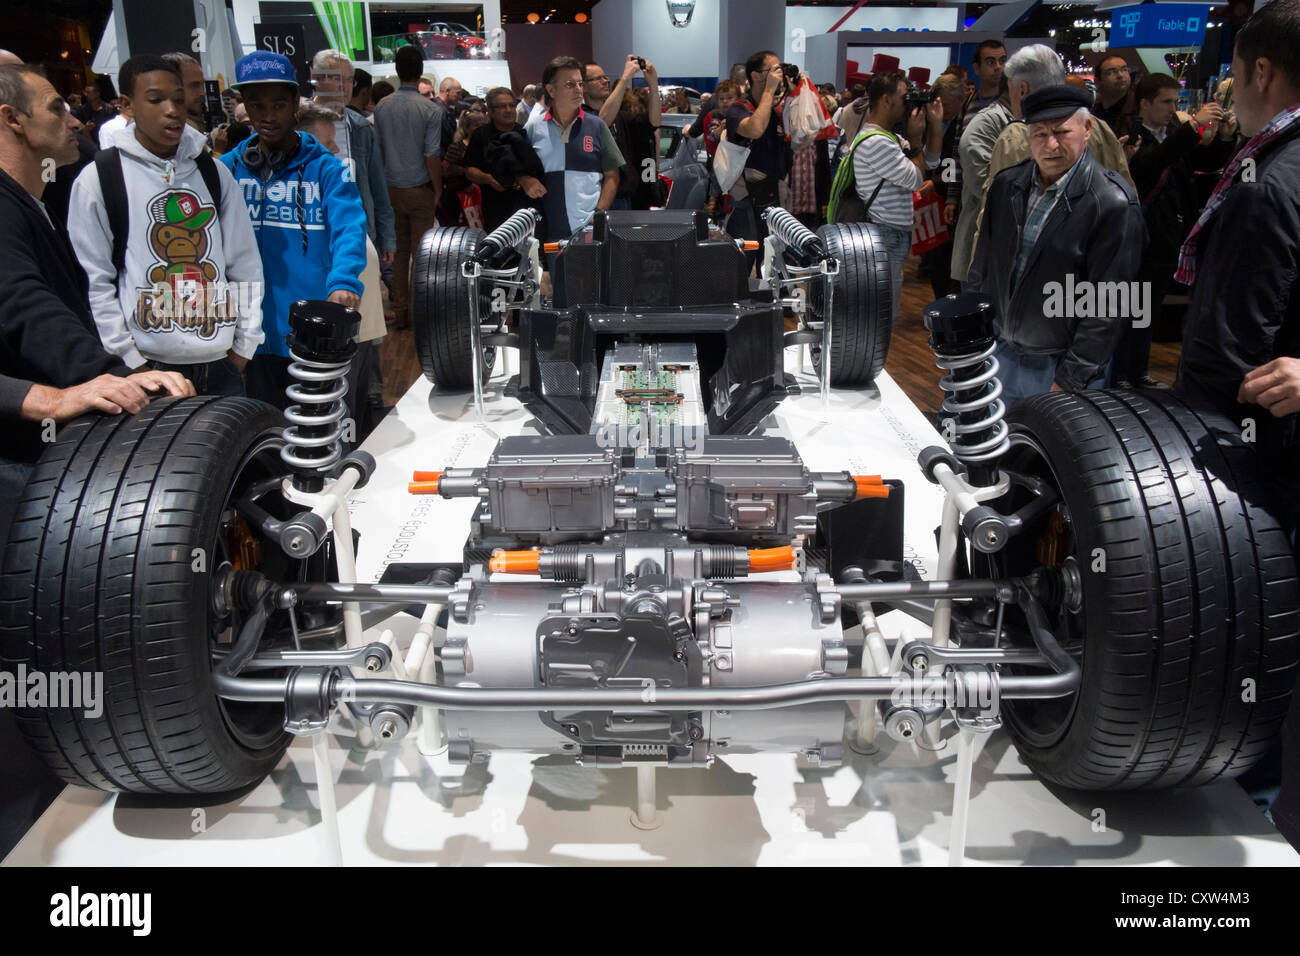 Cut away of chassis and electric motor of new Mercedes Benz SLS AMG Electric Drive sportscar at Paris Motor Show 2012 Stock Photo